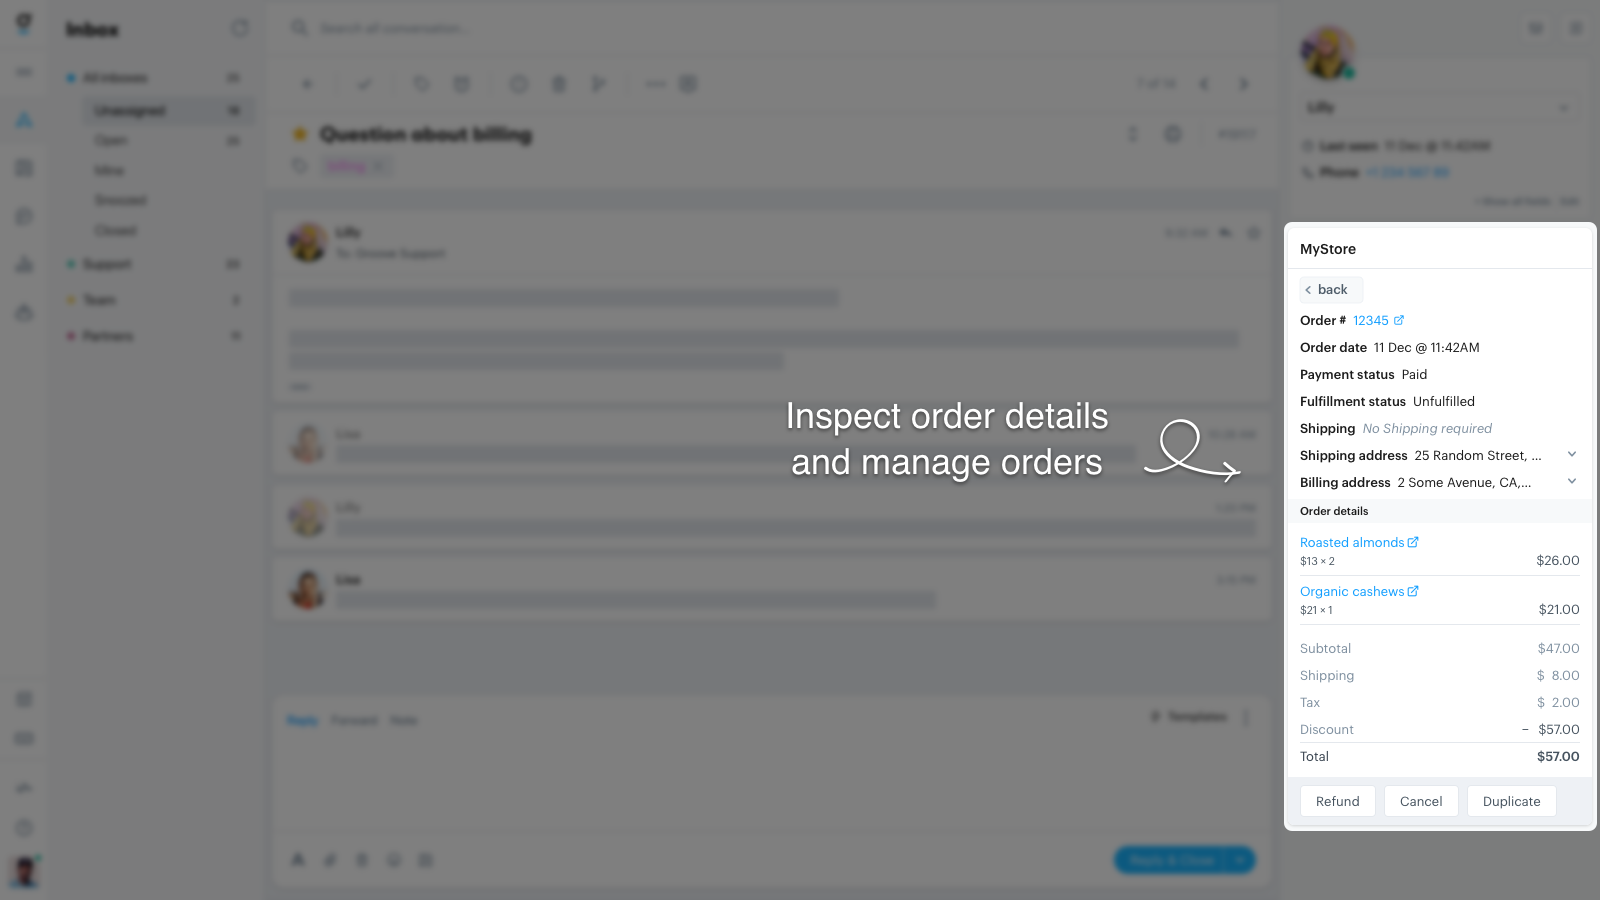 Inspect order details and manage orders.